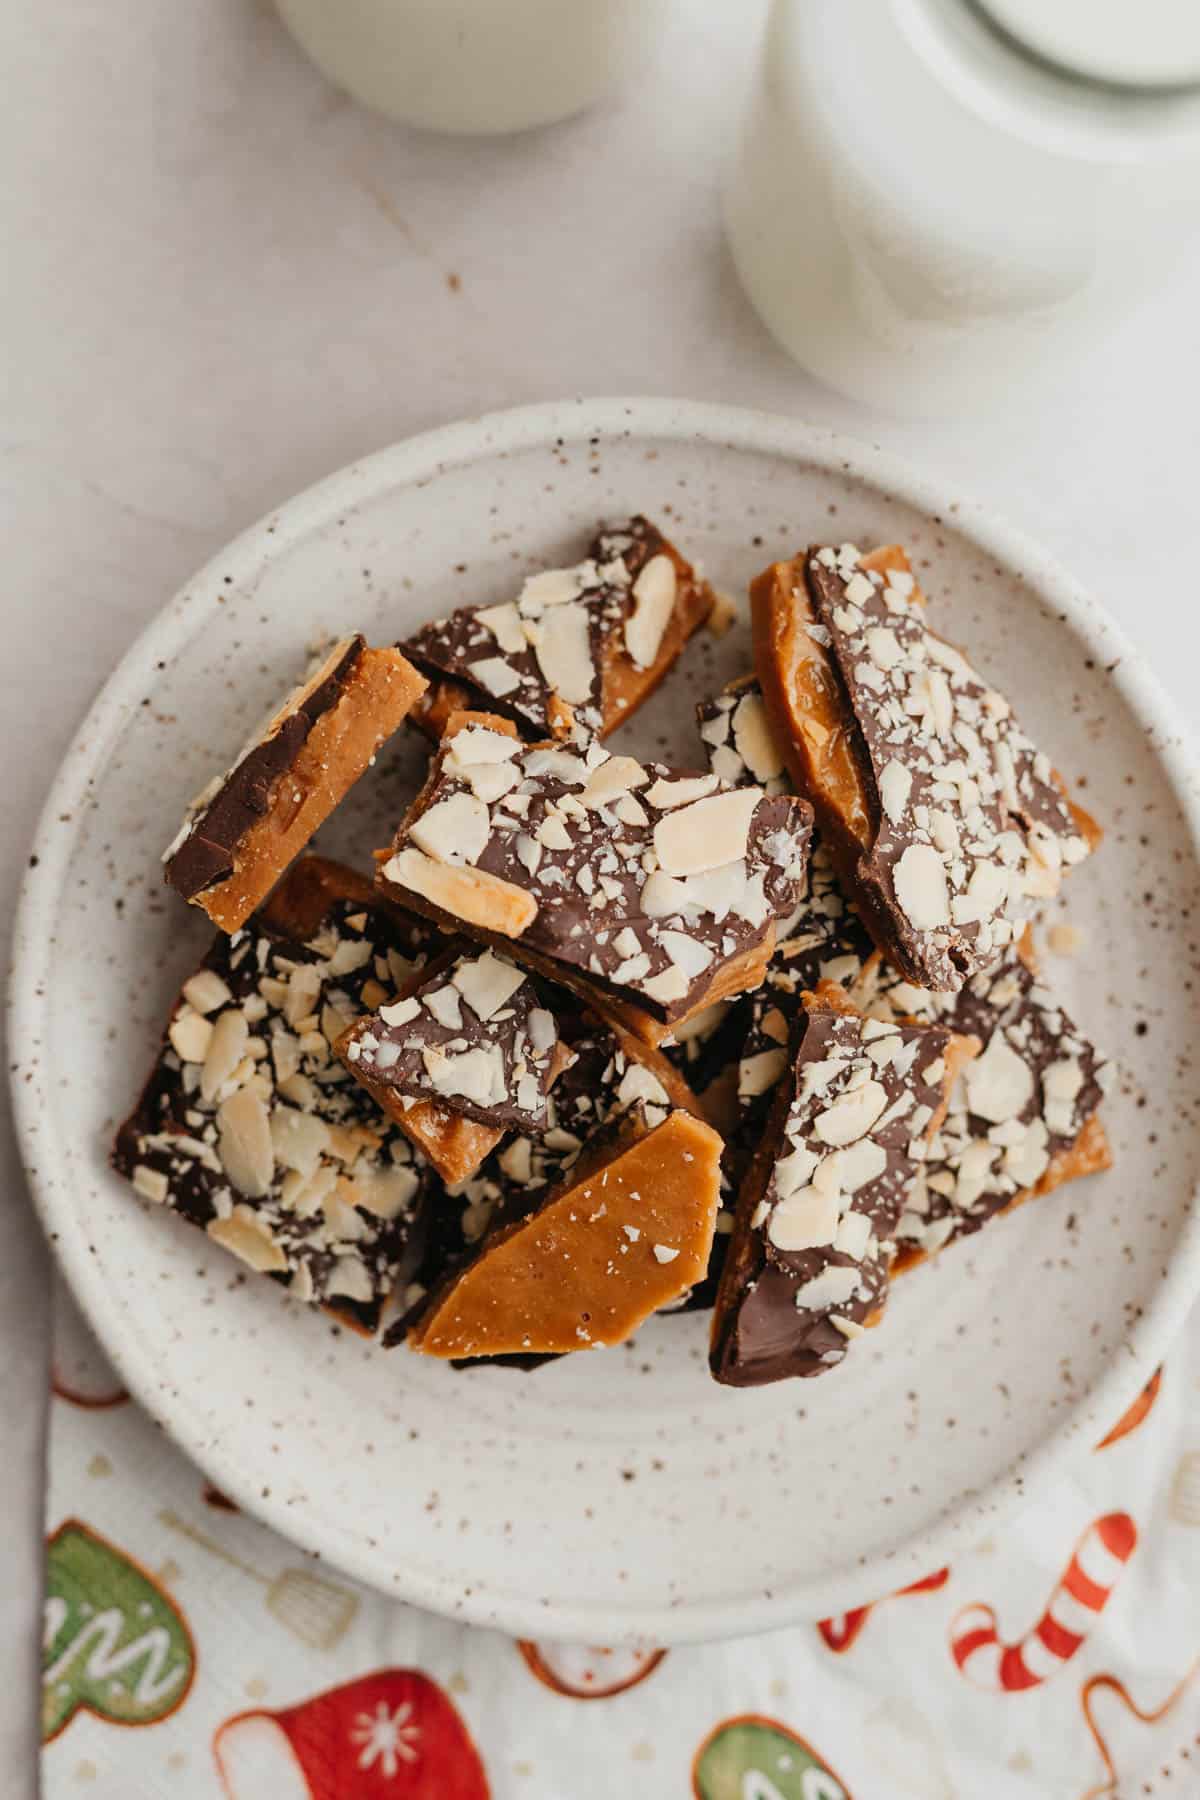 A small plate with pieces of homemade almond toffee.